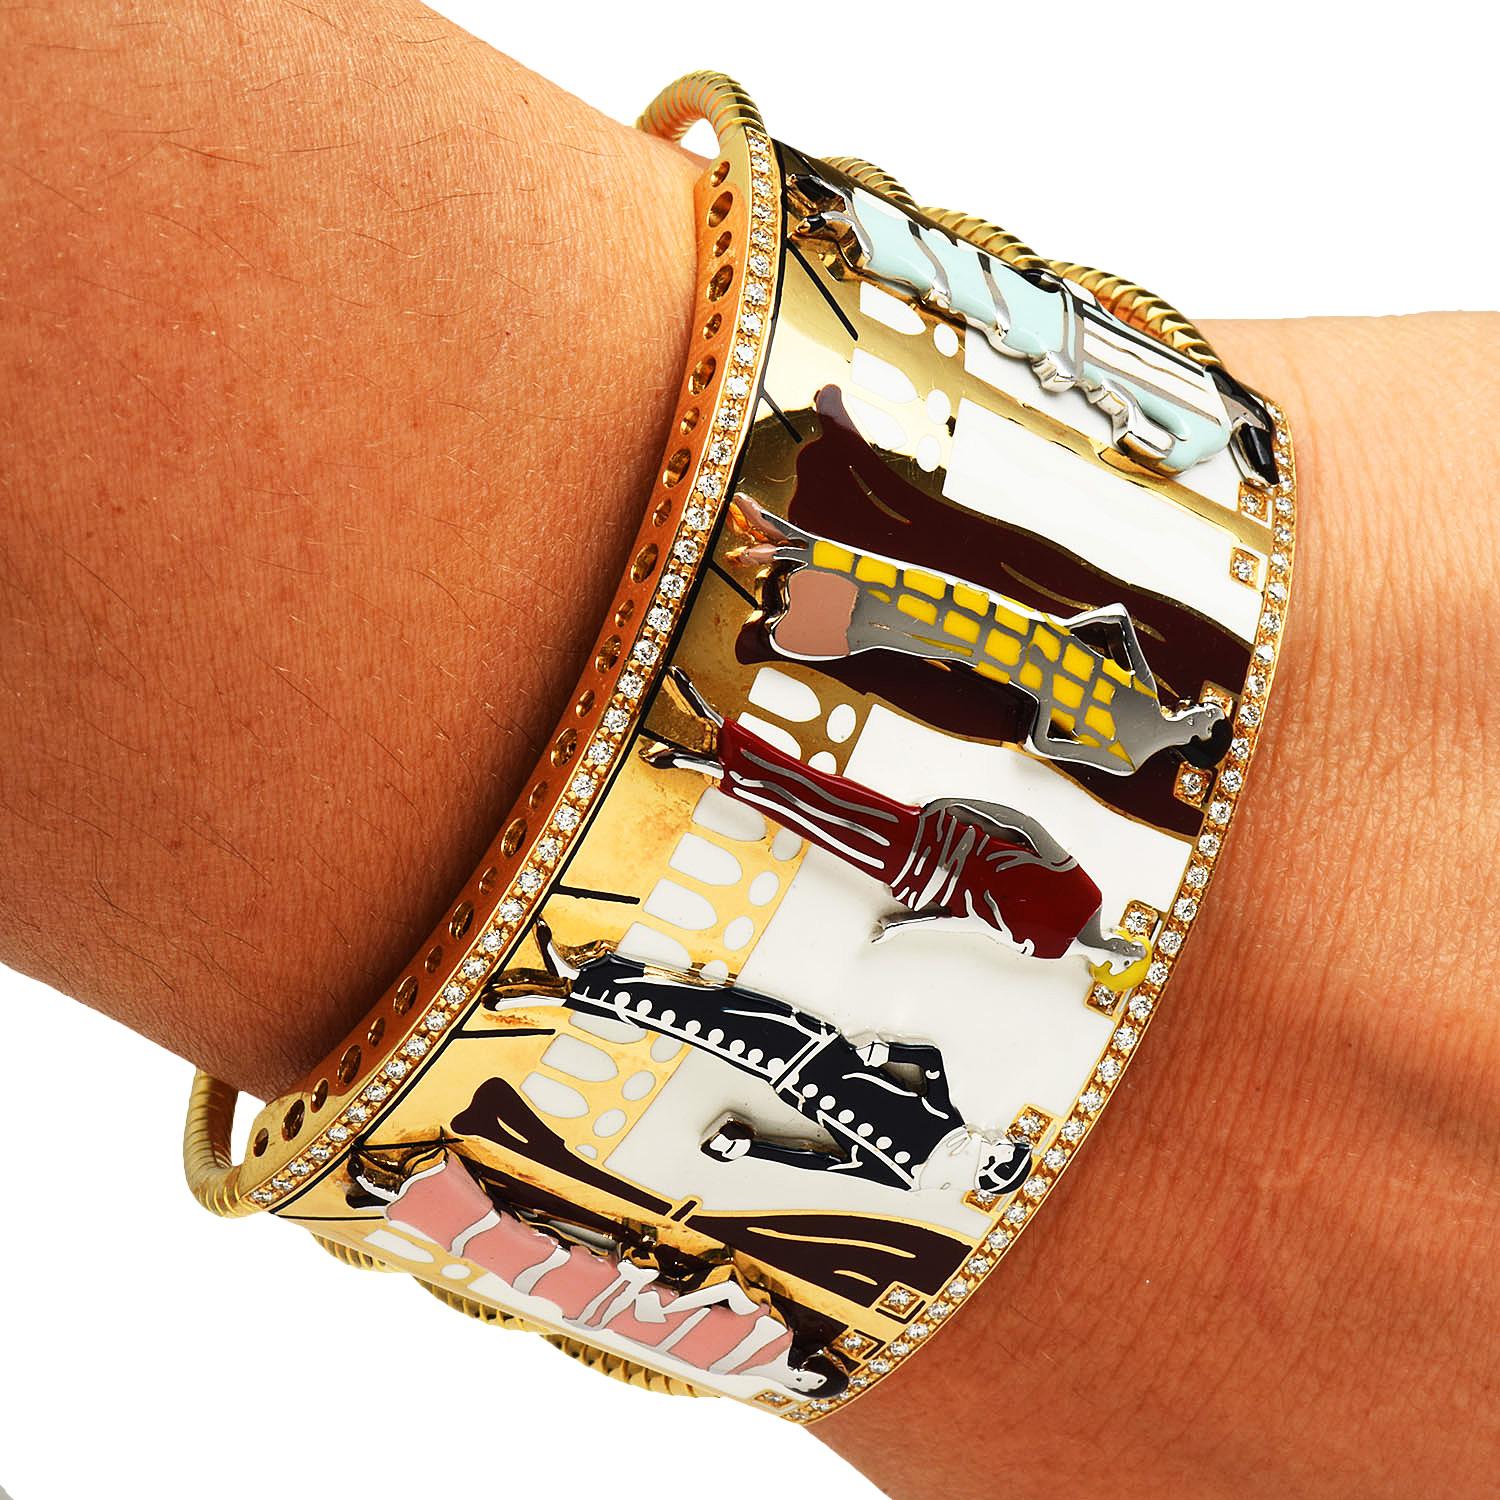 Boutique Piece, Limited edition from Roberto Coin!n This High-quality artistry features a Multicolor Deco era Enamel ladies, hand twisted cuffs made in 18k yellow This wide cuff bracelet is set with approx. 1.00 carats F-G Color, VVS